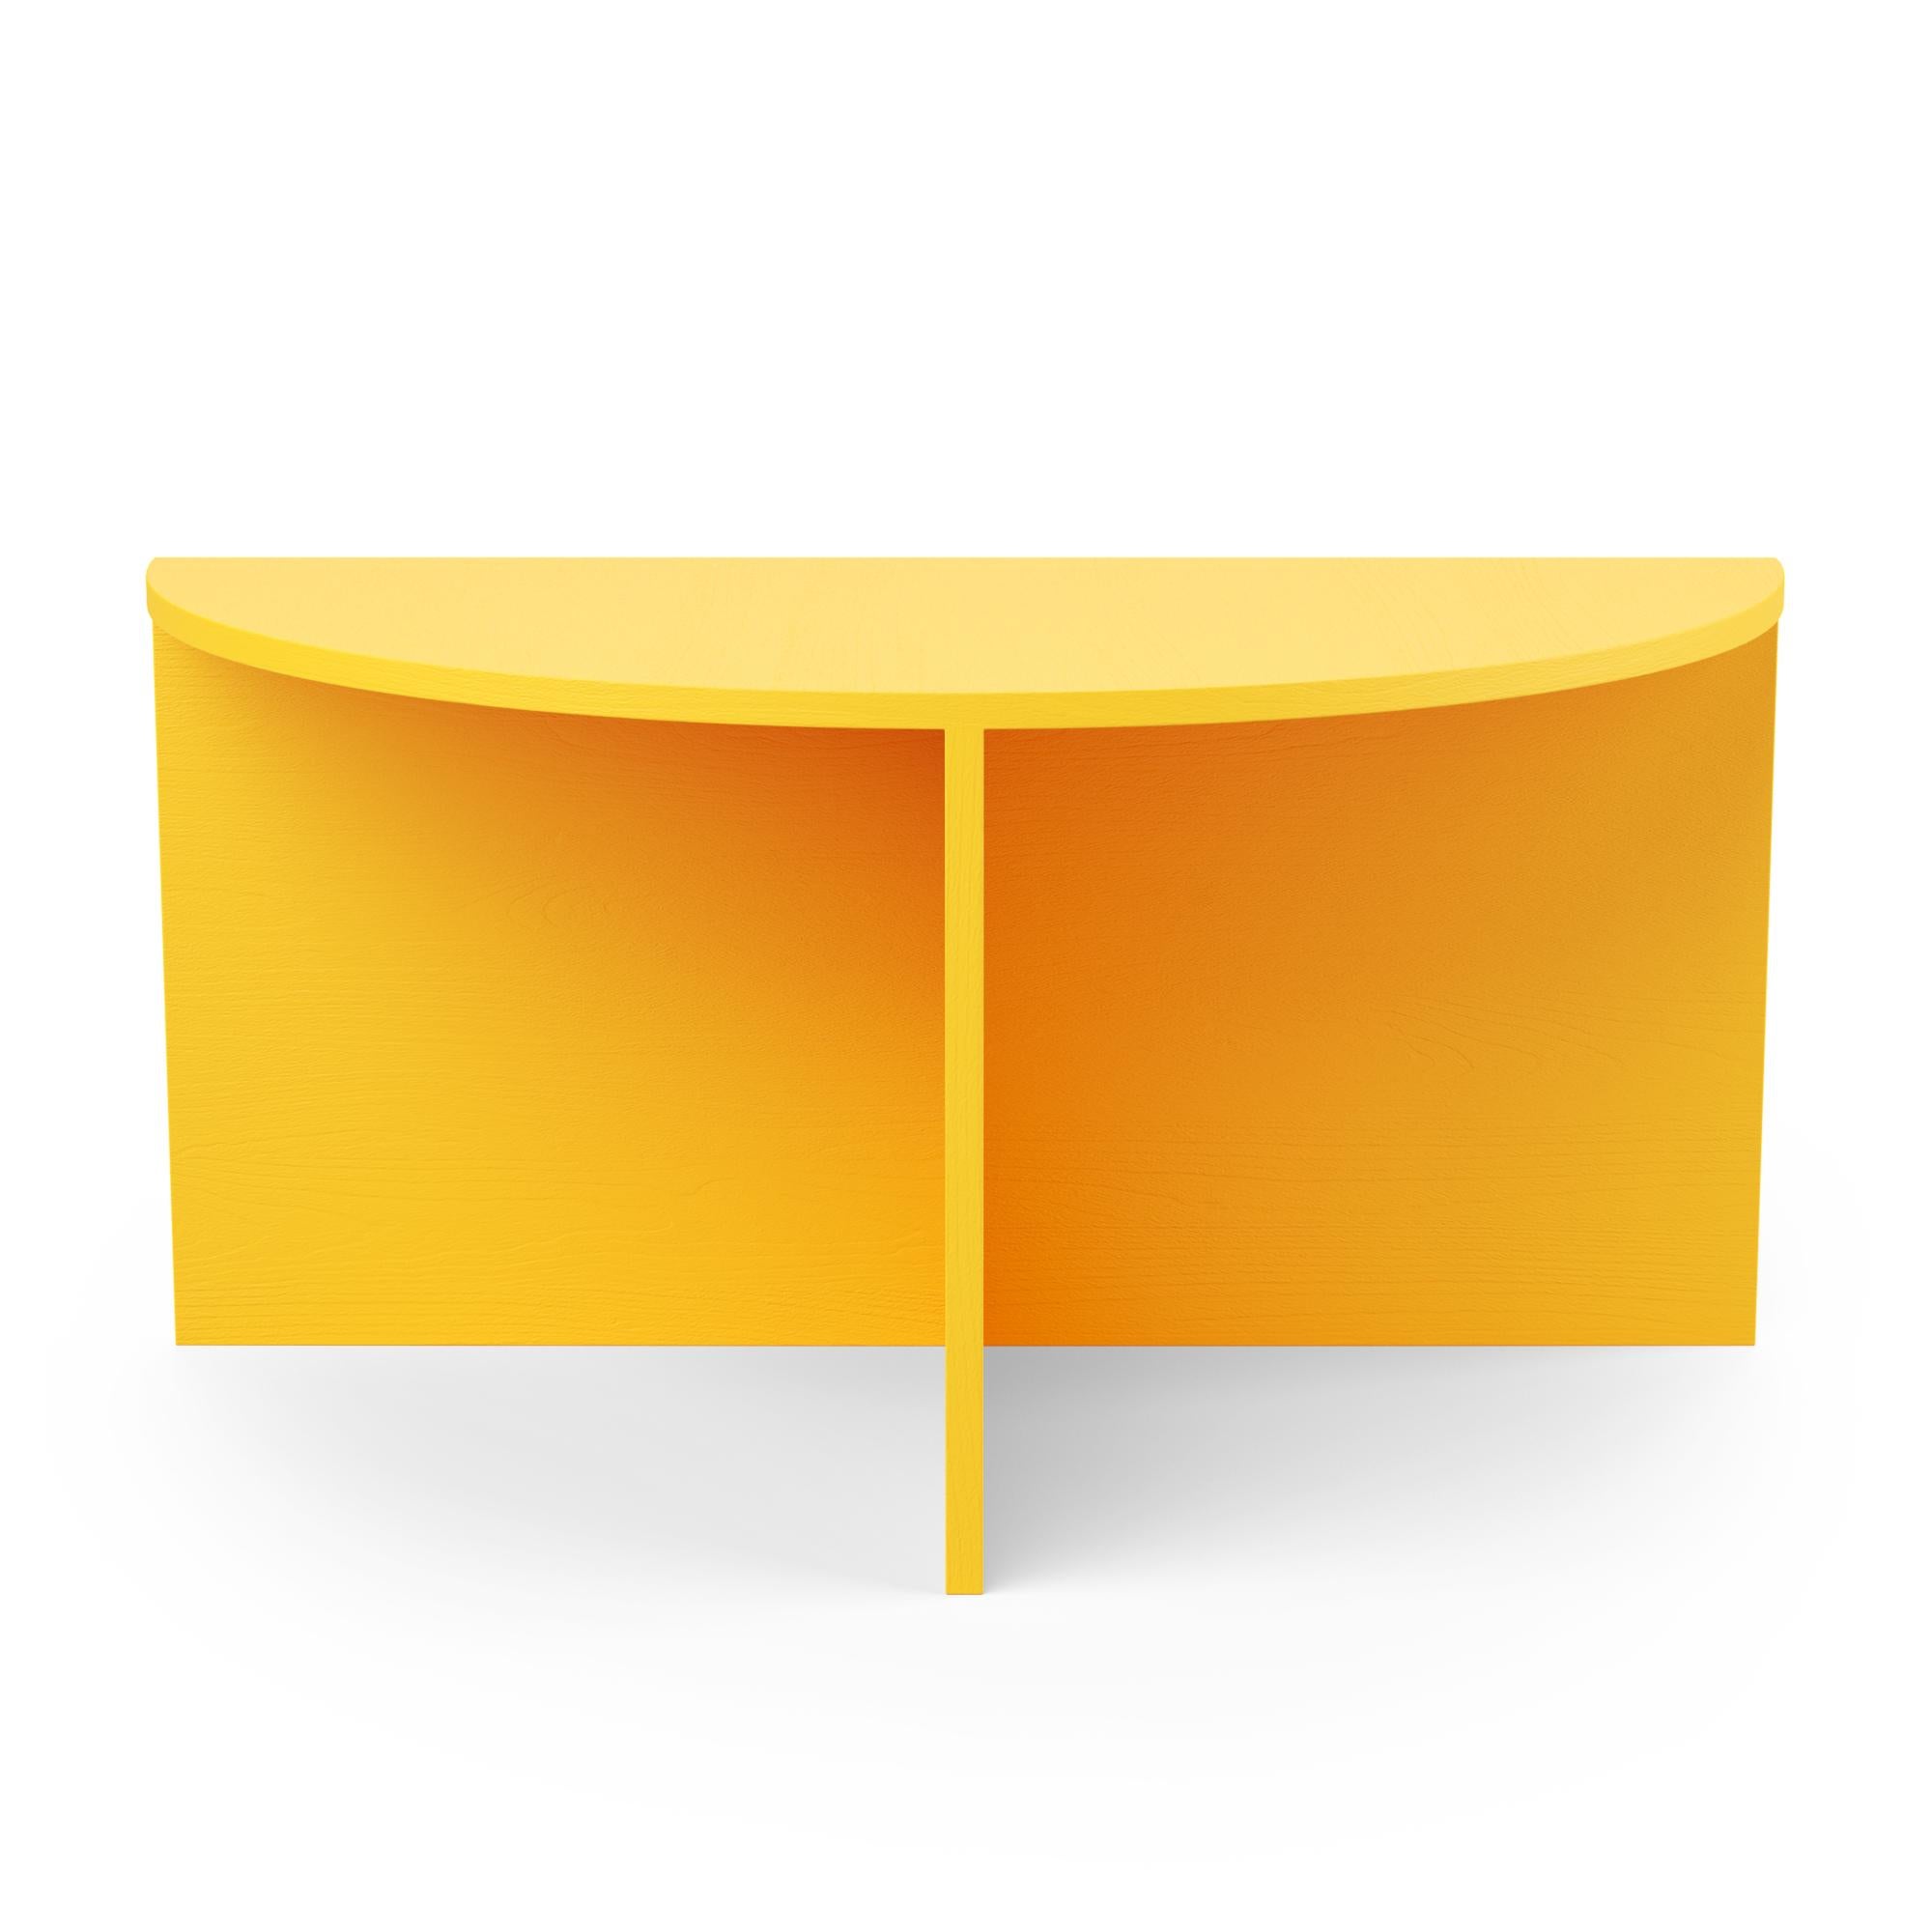 Woodwork Hayche Pie Chart System 1/2 Table, Yellow, Solid Wood, UK, Made To Order For Sale